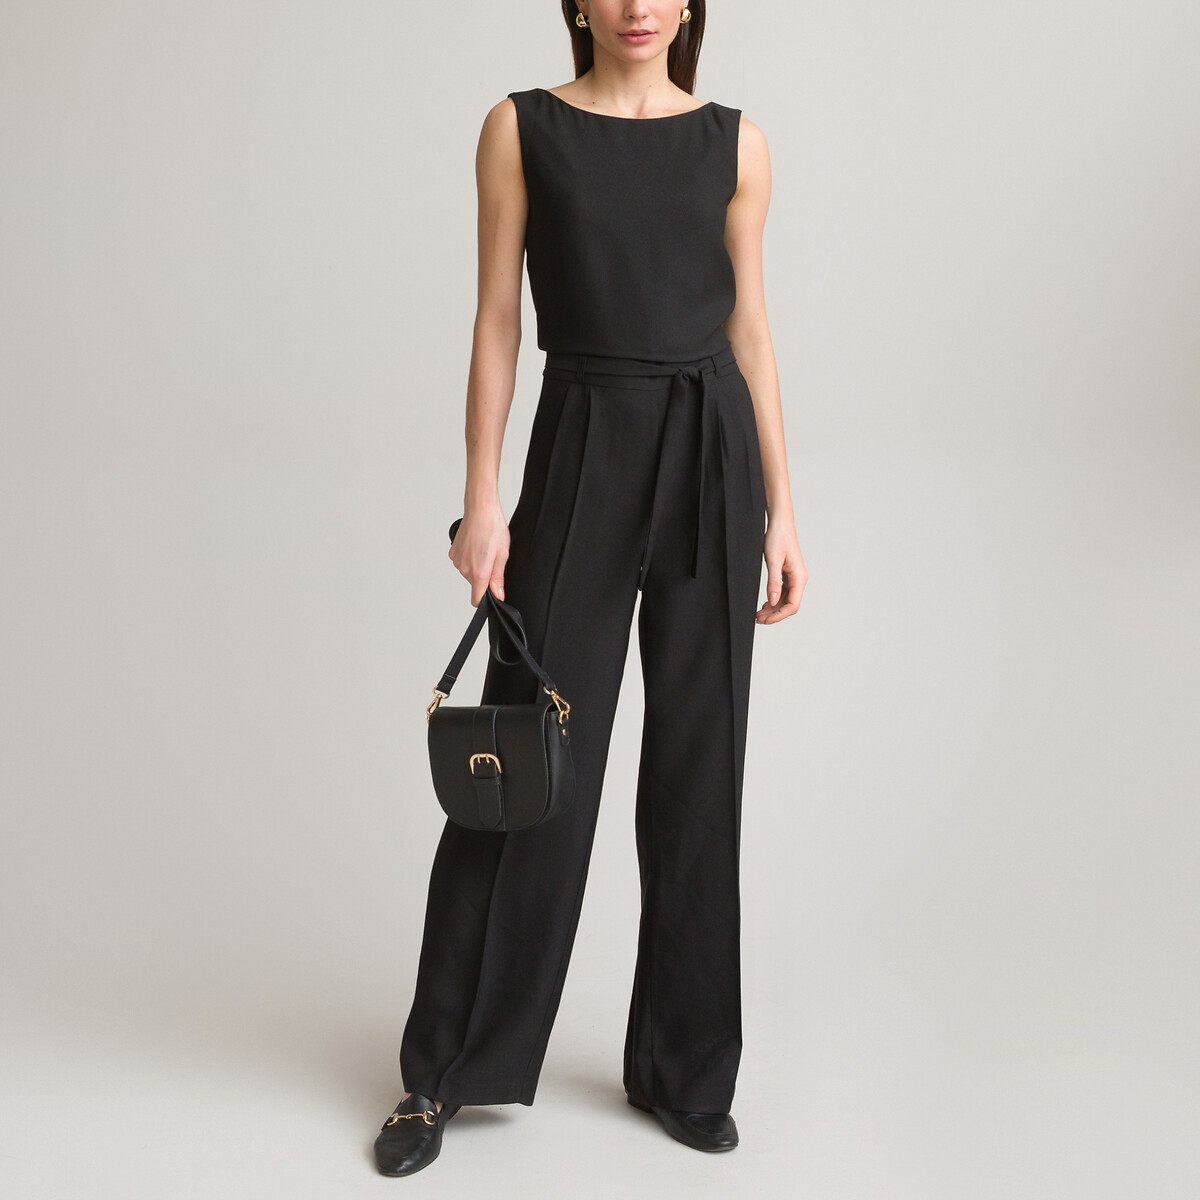 Image of Recycled Cr?pe Jumpsuit, Length 30.5"